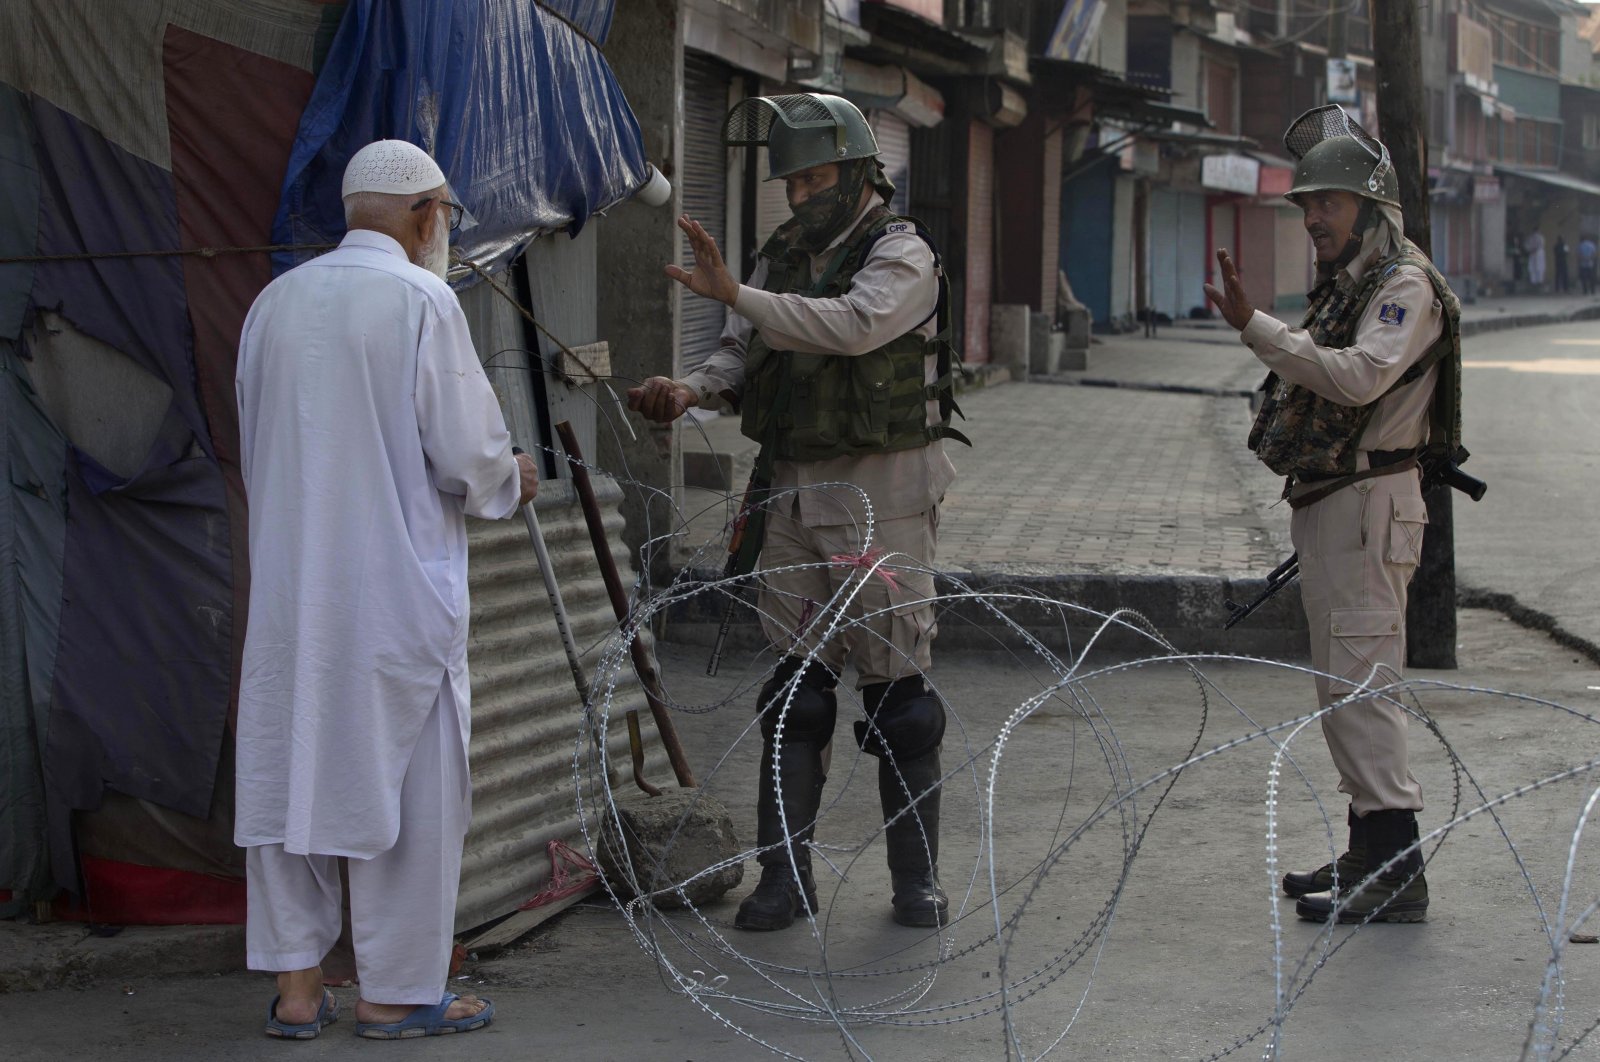 An elderly Kashmiri man is stopped before being allowed to pass near a temporary checkpoint set up by Indian paramilitary soldiers during a lockdown in Srinagar, Indian-administered Kashmir, Aug. 23, 2019. (AP Photo)